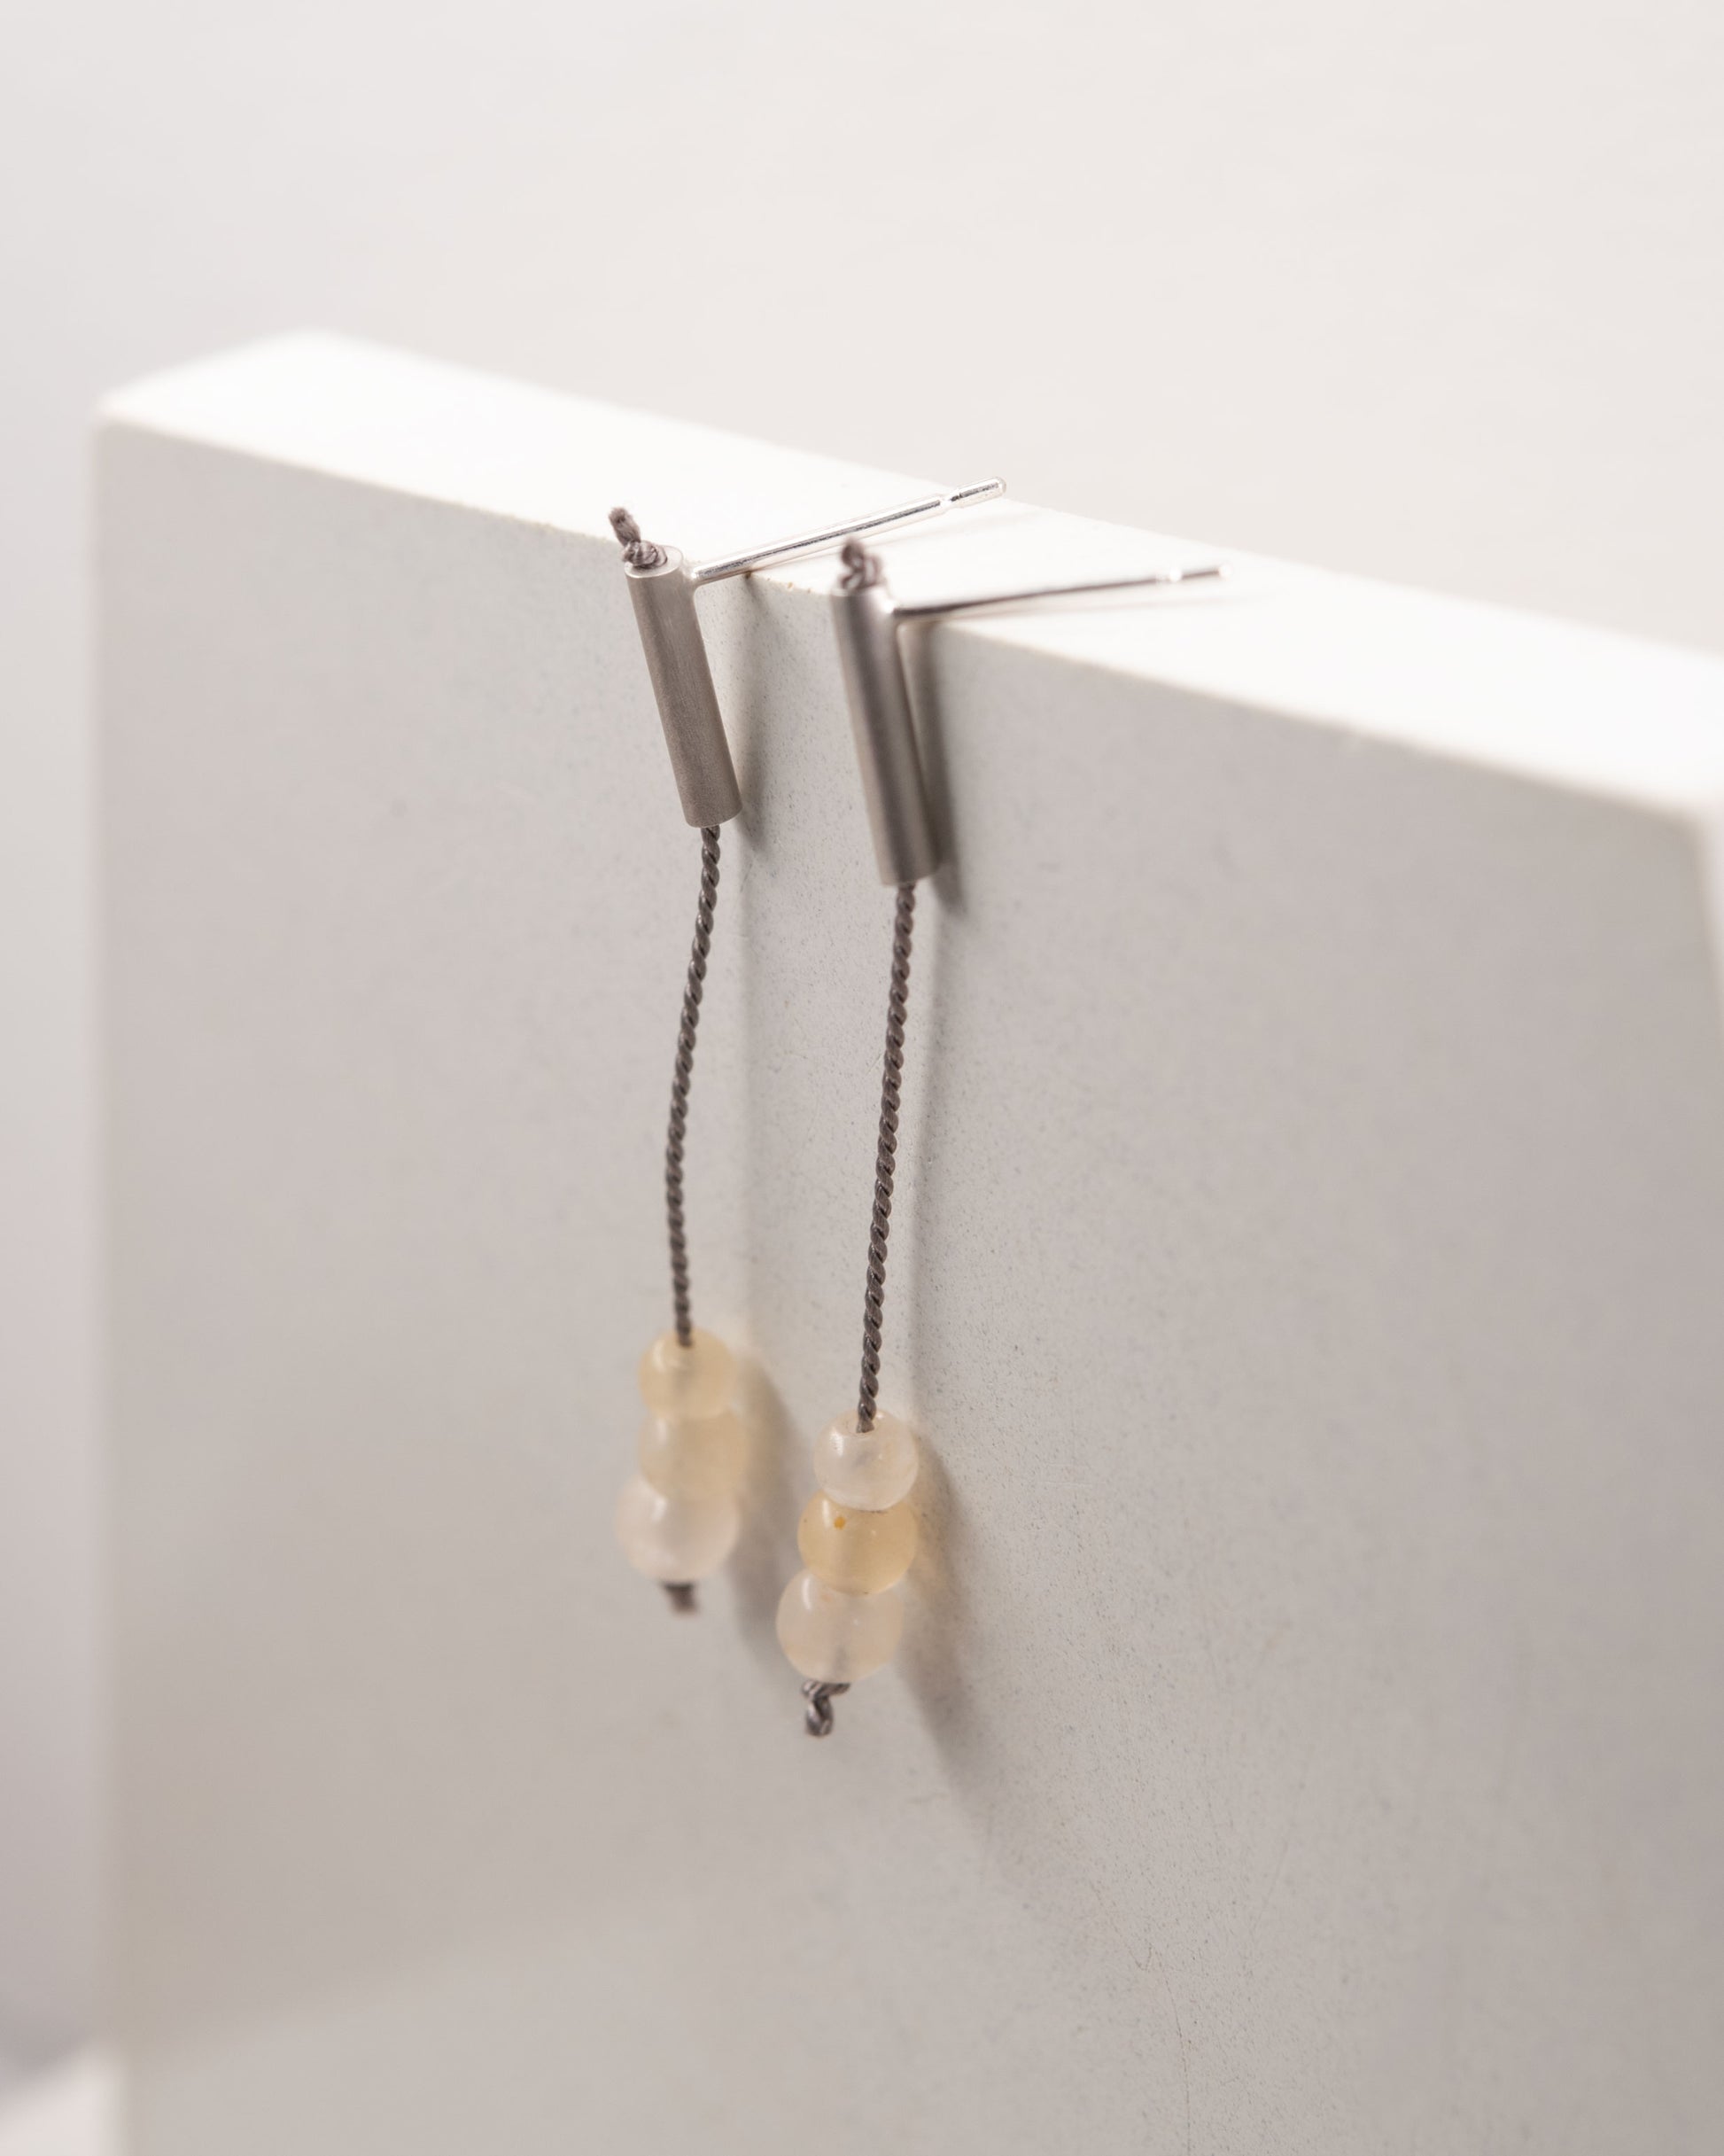 Pair of 42 millimeters length pendant earrings handmade in in Paris by A g J c  from  tube of matte sterling silver with a beige silk cord threaded through the center for hanging yellow quartz beads. 